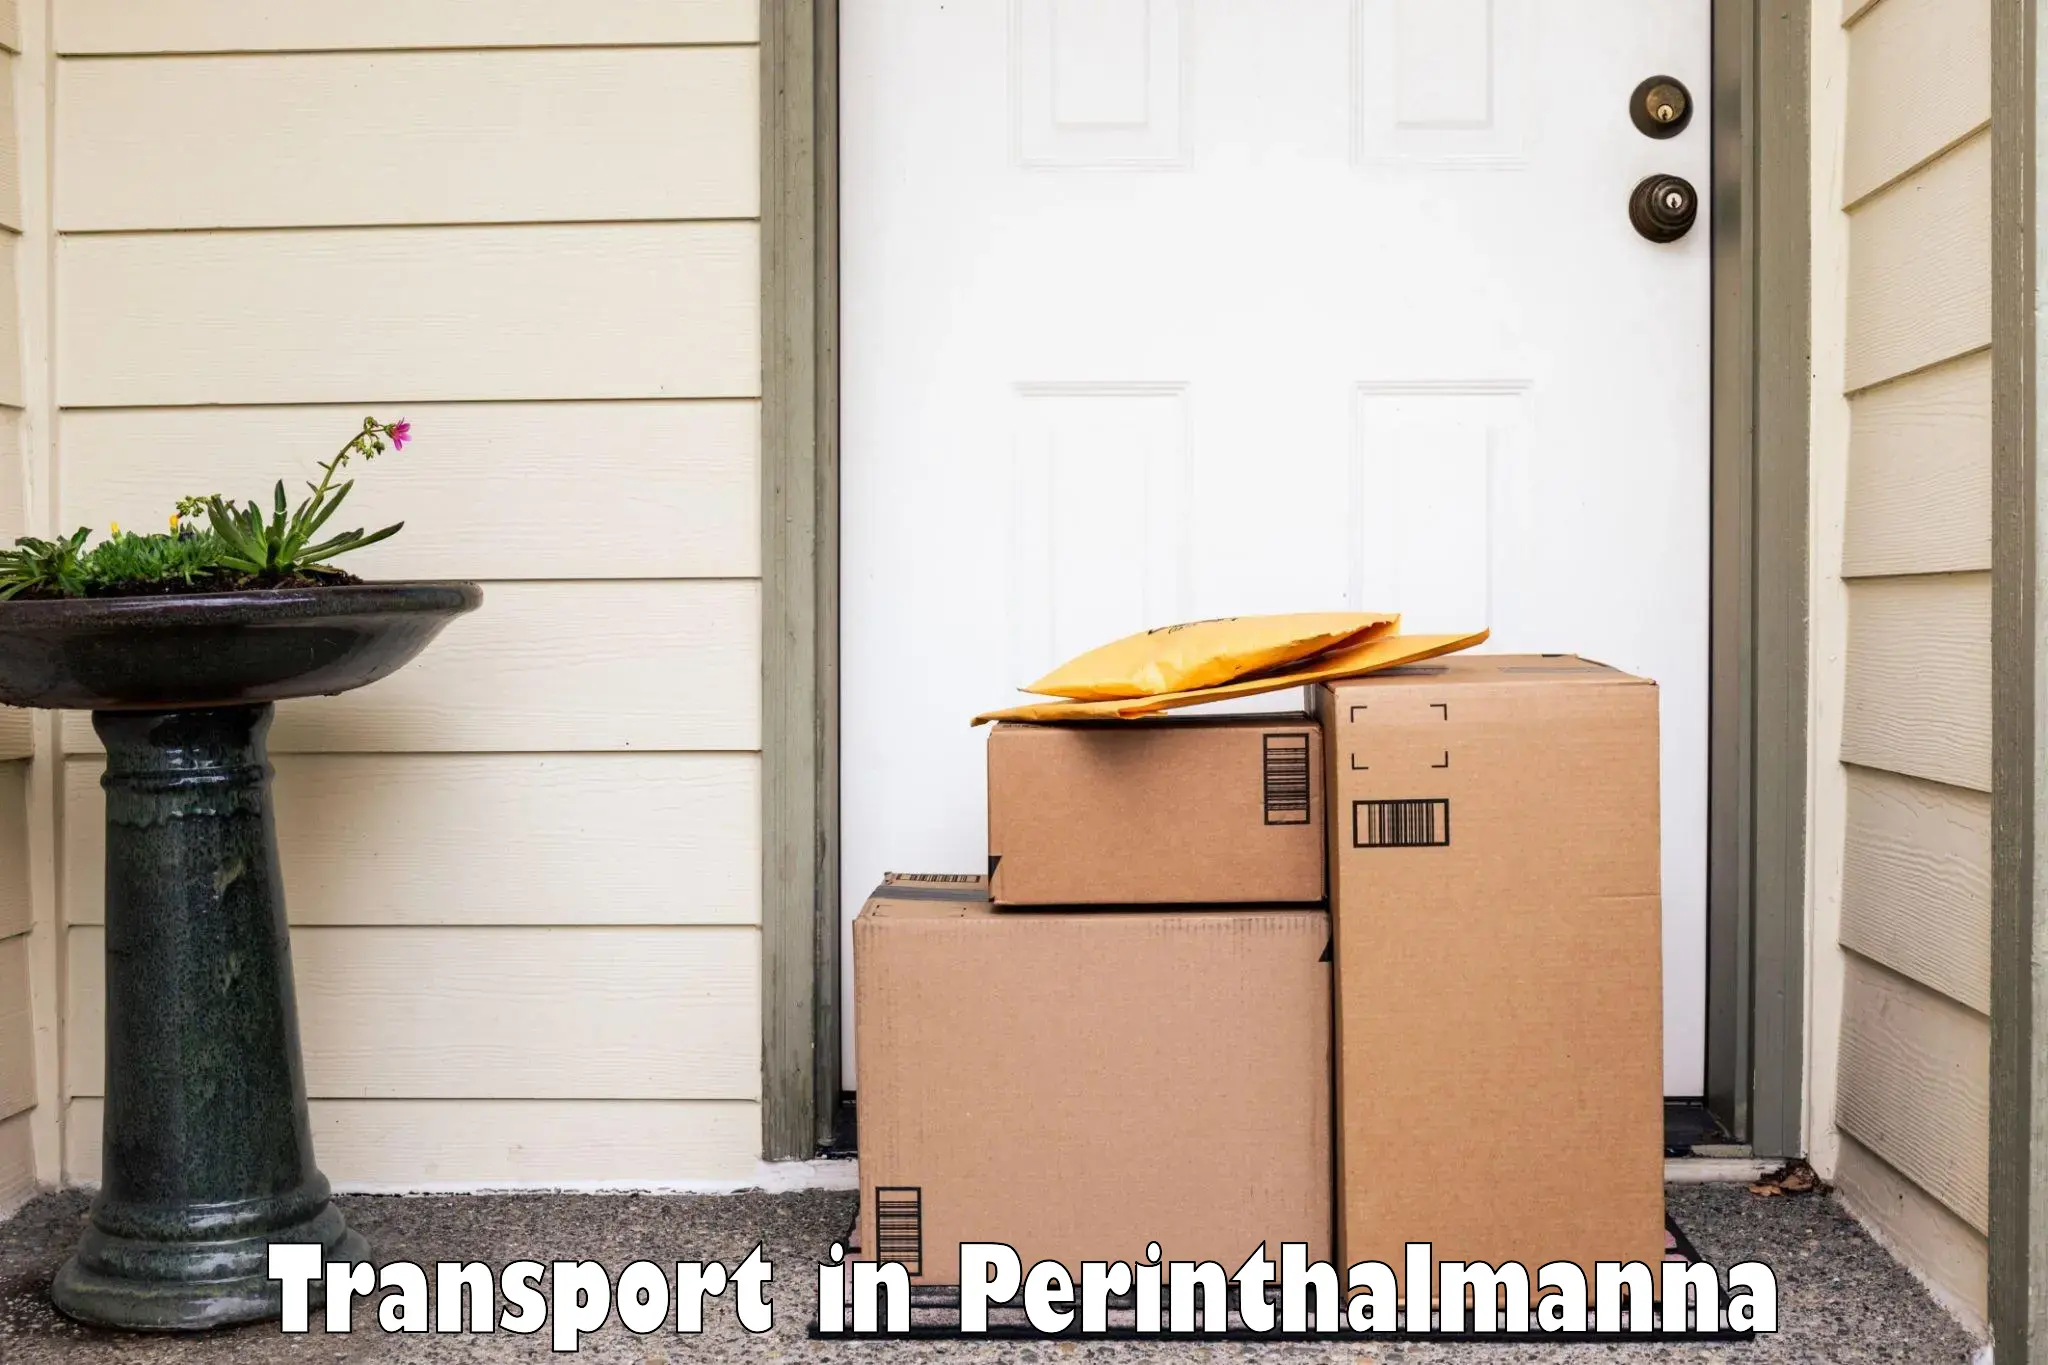 Container transportation services in Perinthalmanna